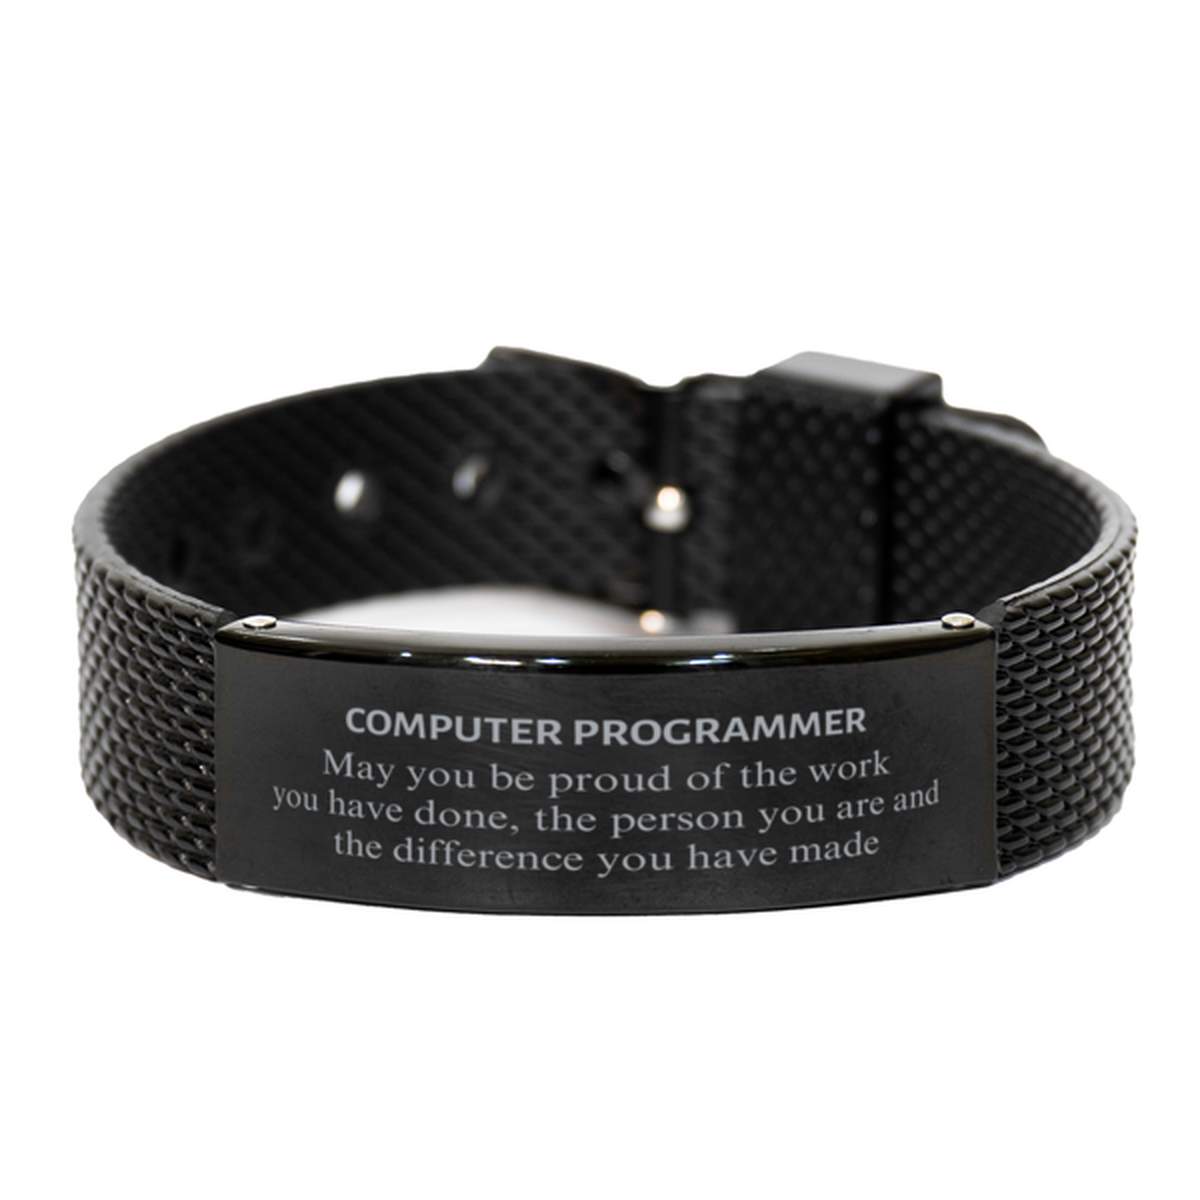 Computer Programmer May you be proud of the work you have done, Retirement Computer Programmer Black Shark Mesh Bracelet for Colleague Appreciation Gifts Amazing for Computer Programmer